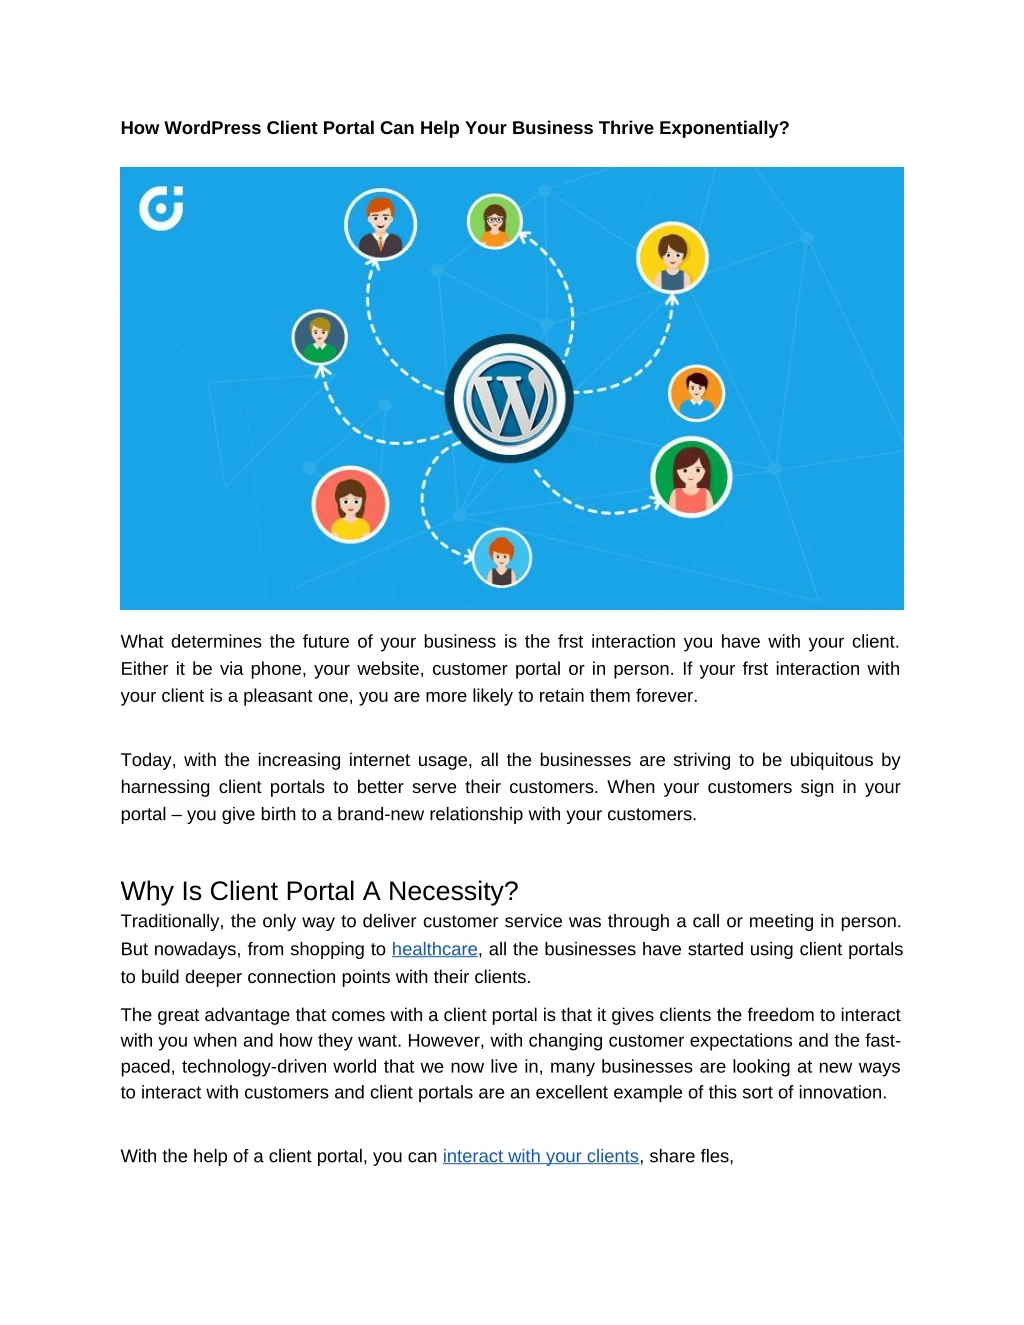 how wordpress client portal can help your